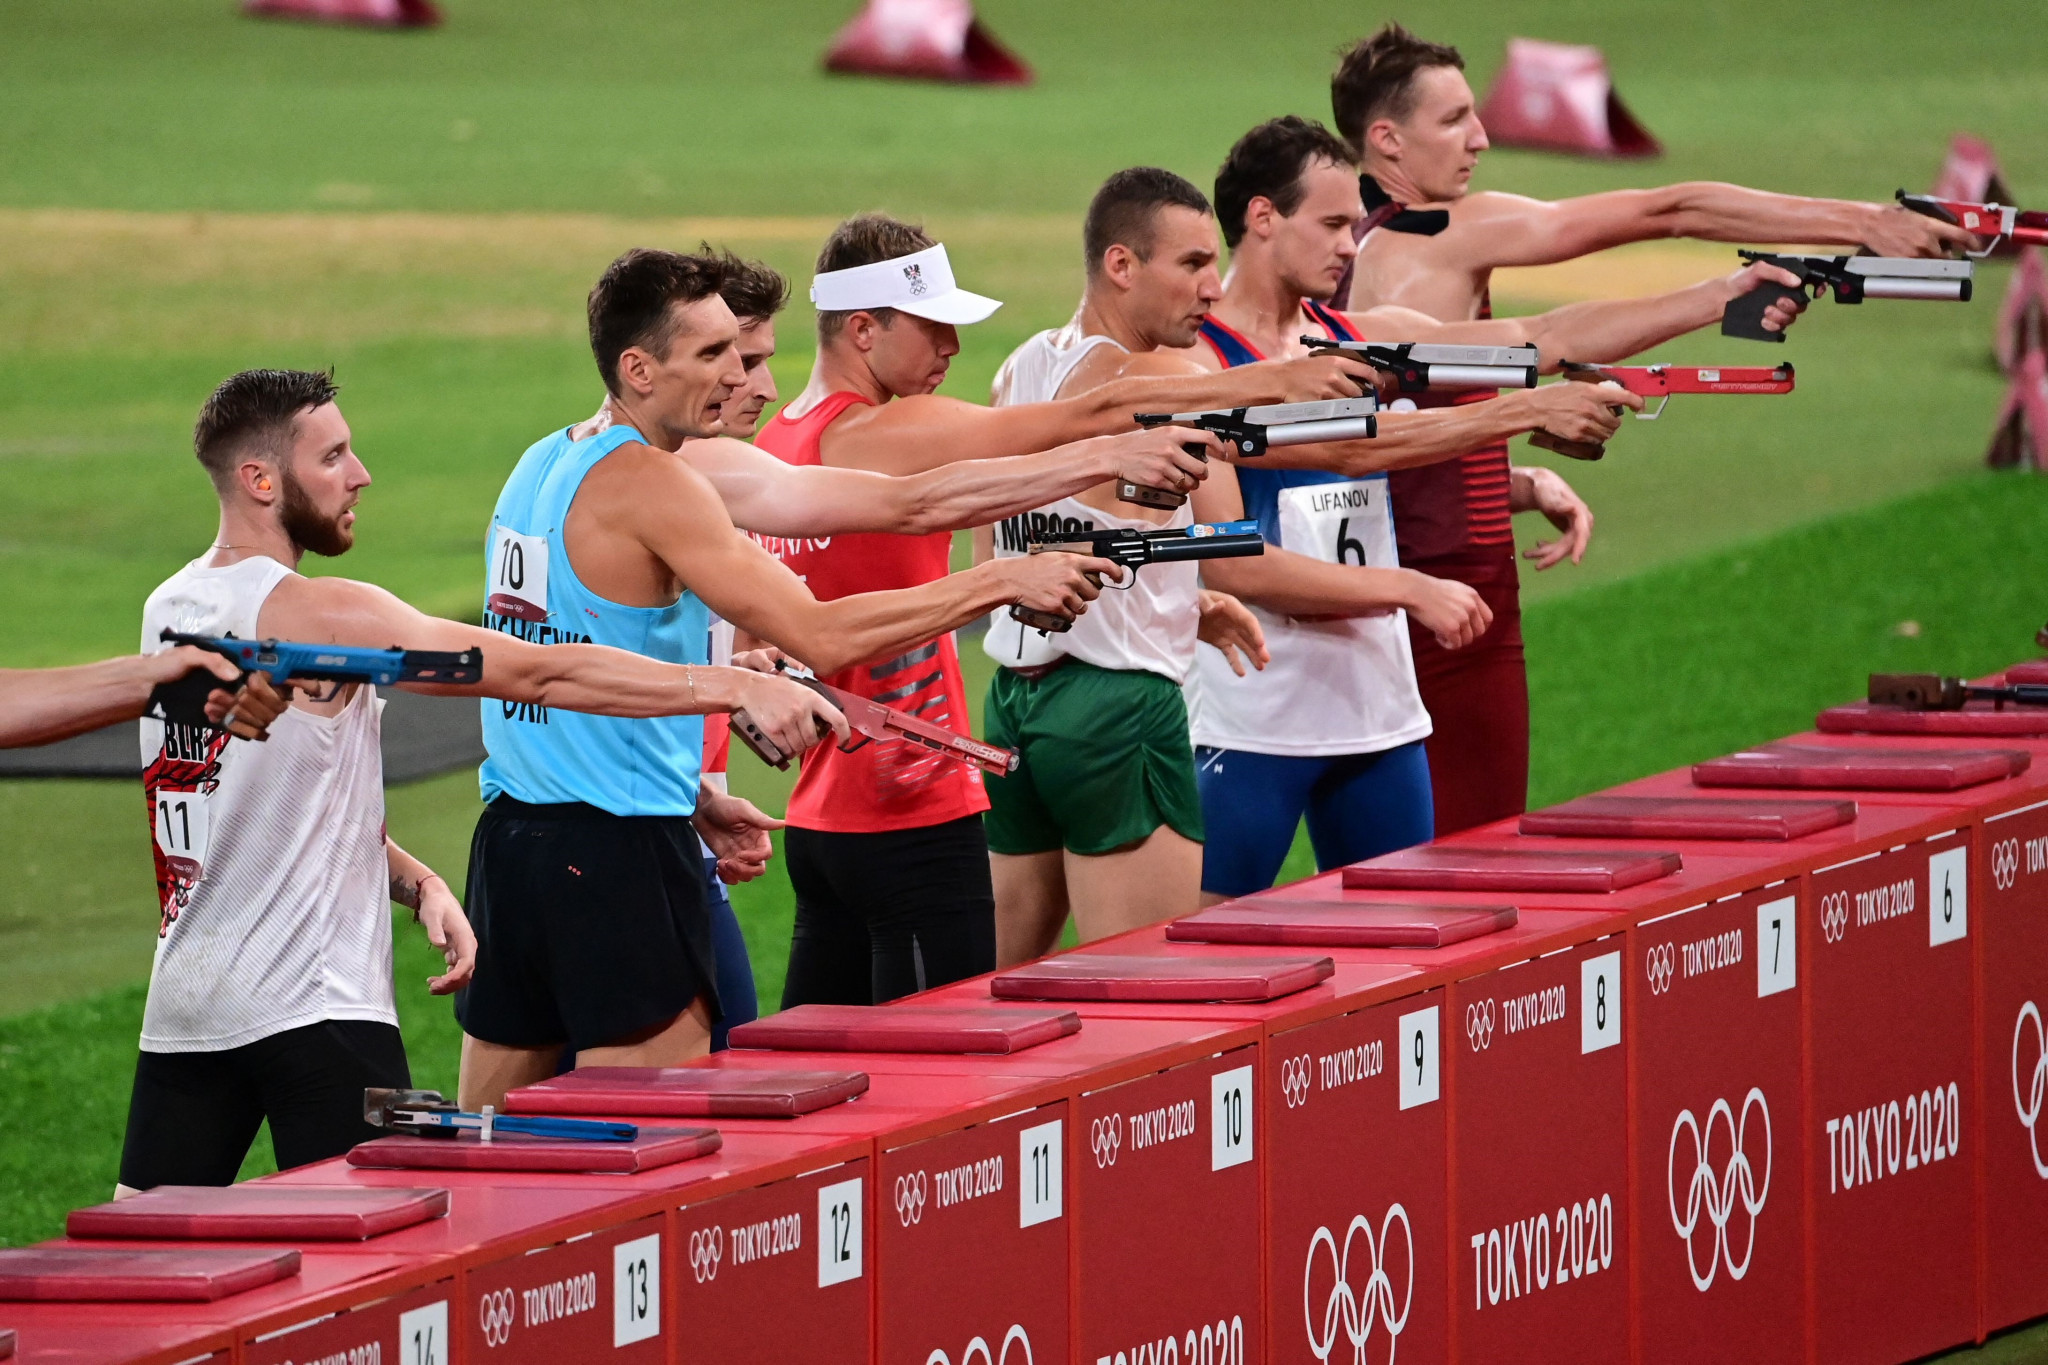 UIPM proposes laser-run for inclusion at Victoria 2026 Commonwealth Games